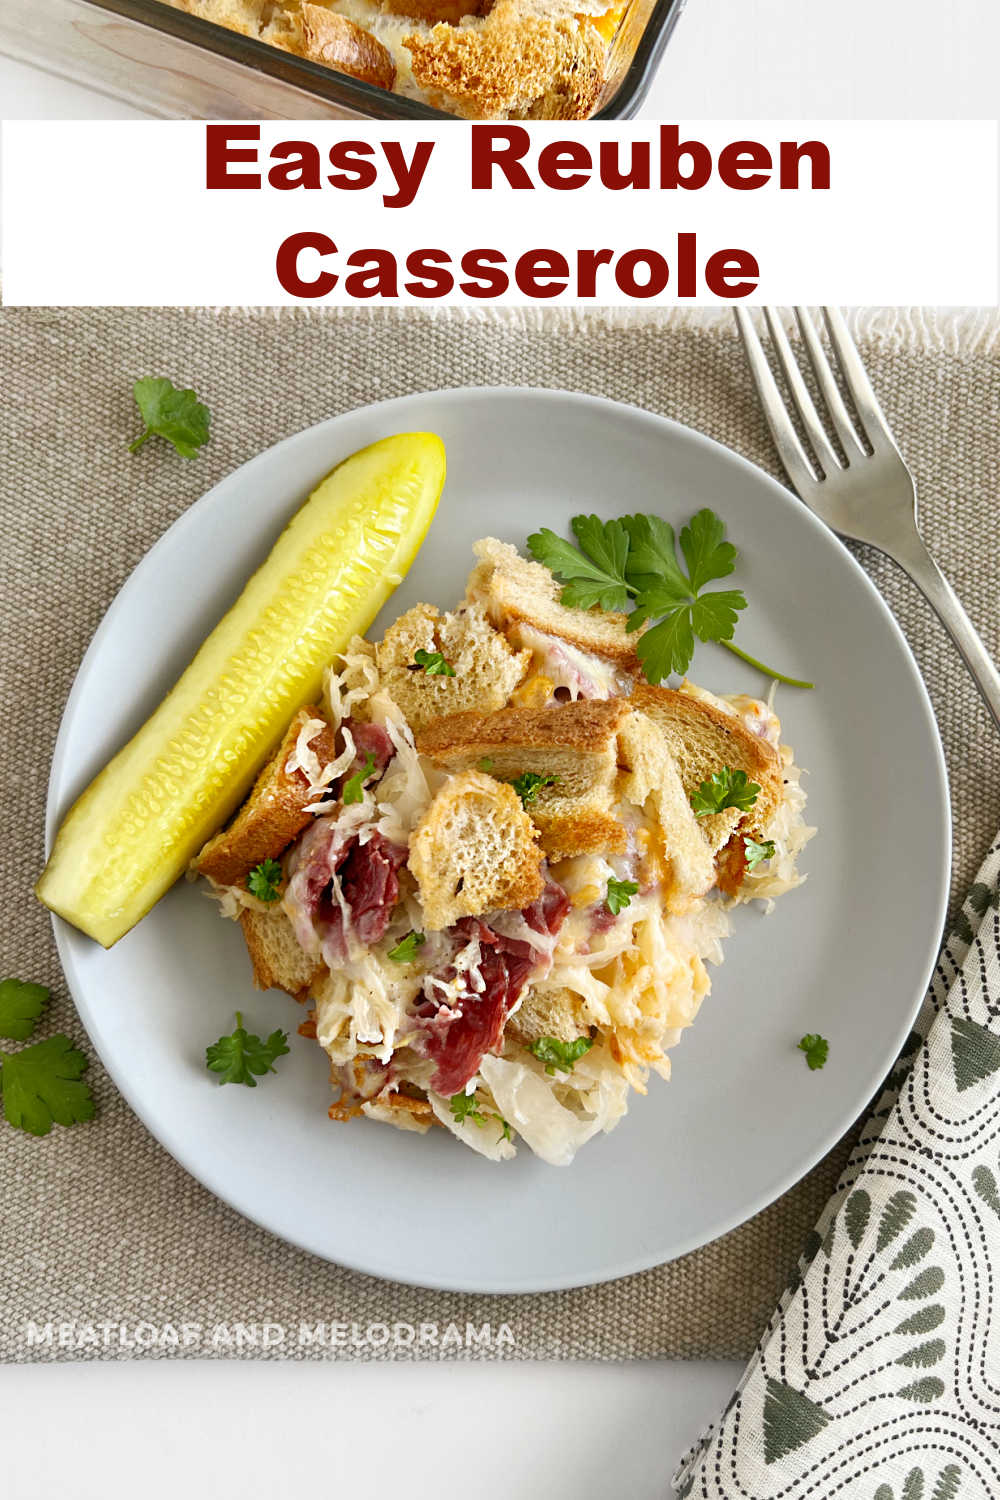 This Easy Baked Reuben Casserole has corned beef, sauerkraut, Swiss cheese, rye bread and creamy dressing. Like the classic sandwich in casserole form! This family favorite is perfect for a quick dinner on St. Patrick's Day and definitely comfort food! via @meamel